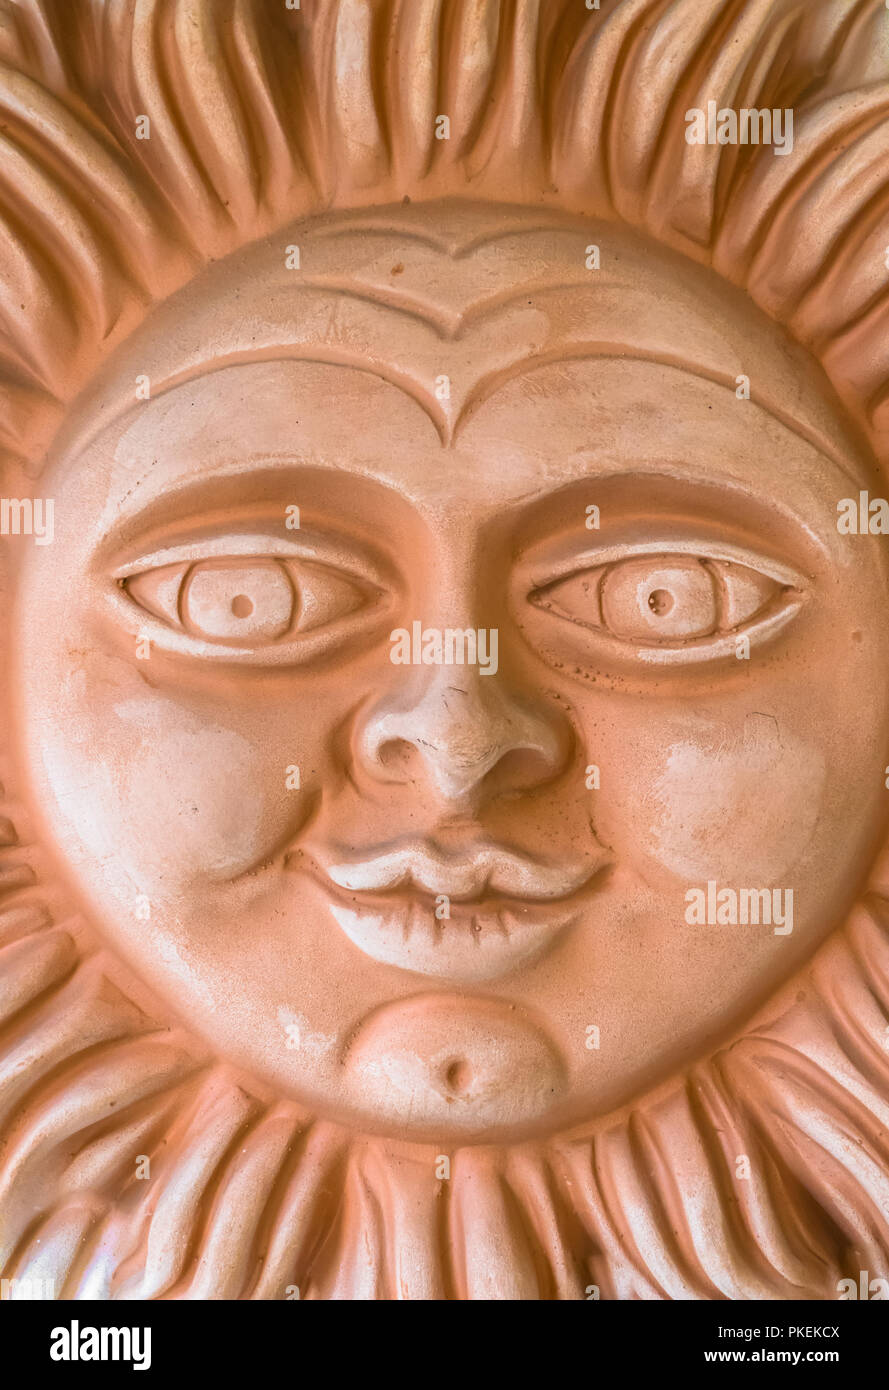 Clay sculpture depicting a smiling sun. It can be used as background. Stock Photo